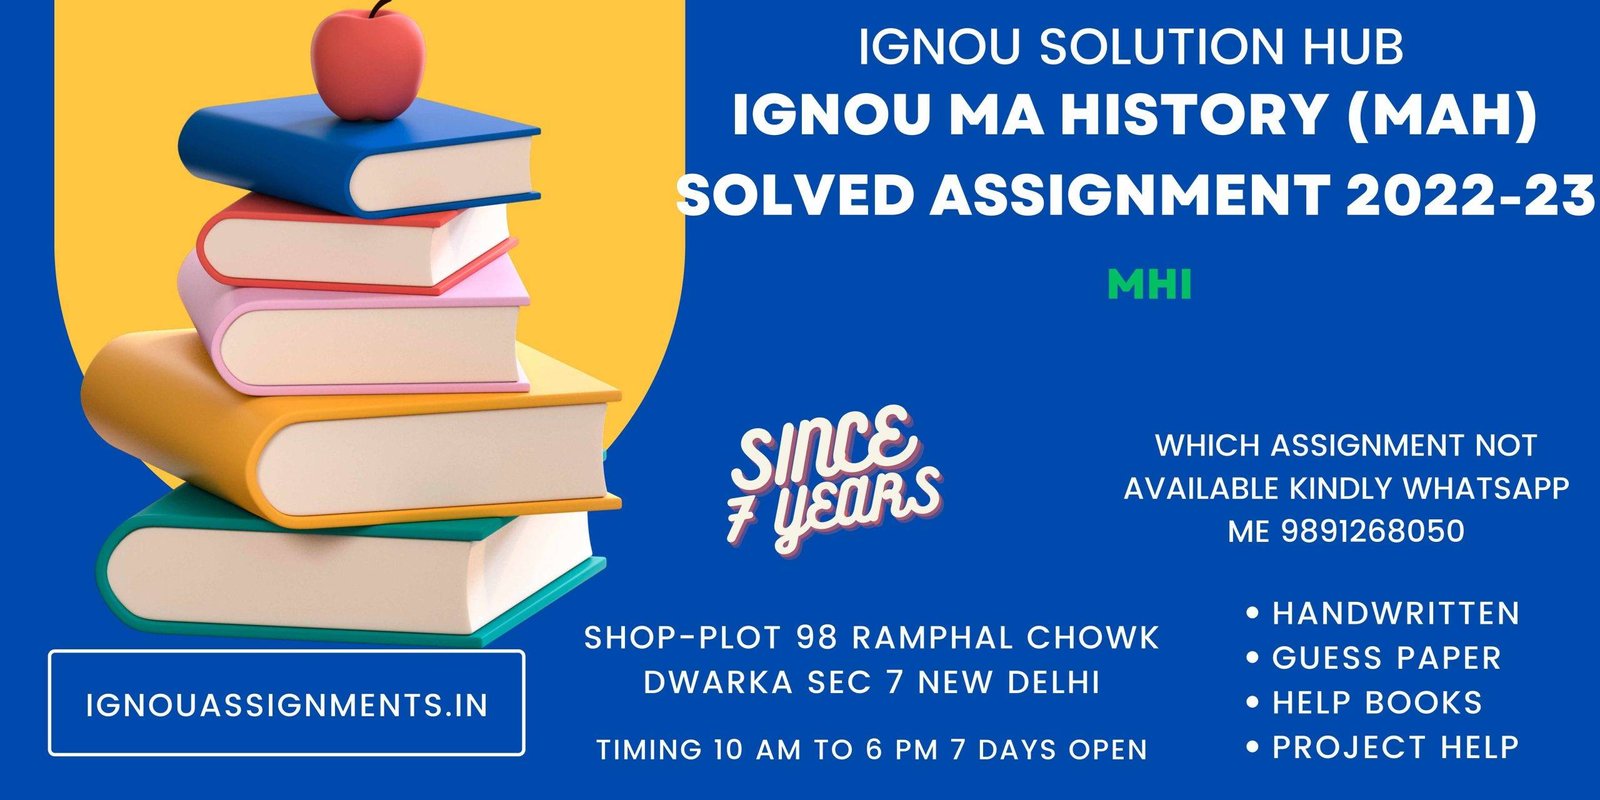 ignou ma history solved assignment free download pdf